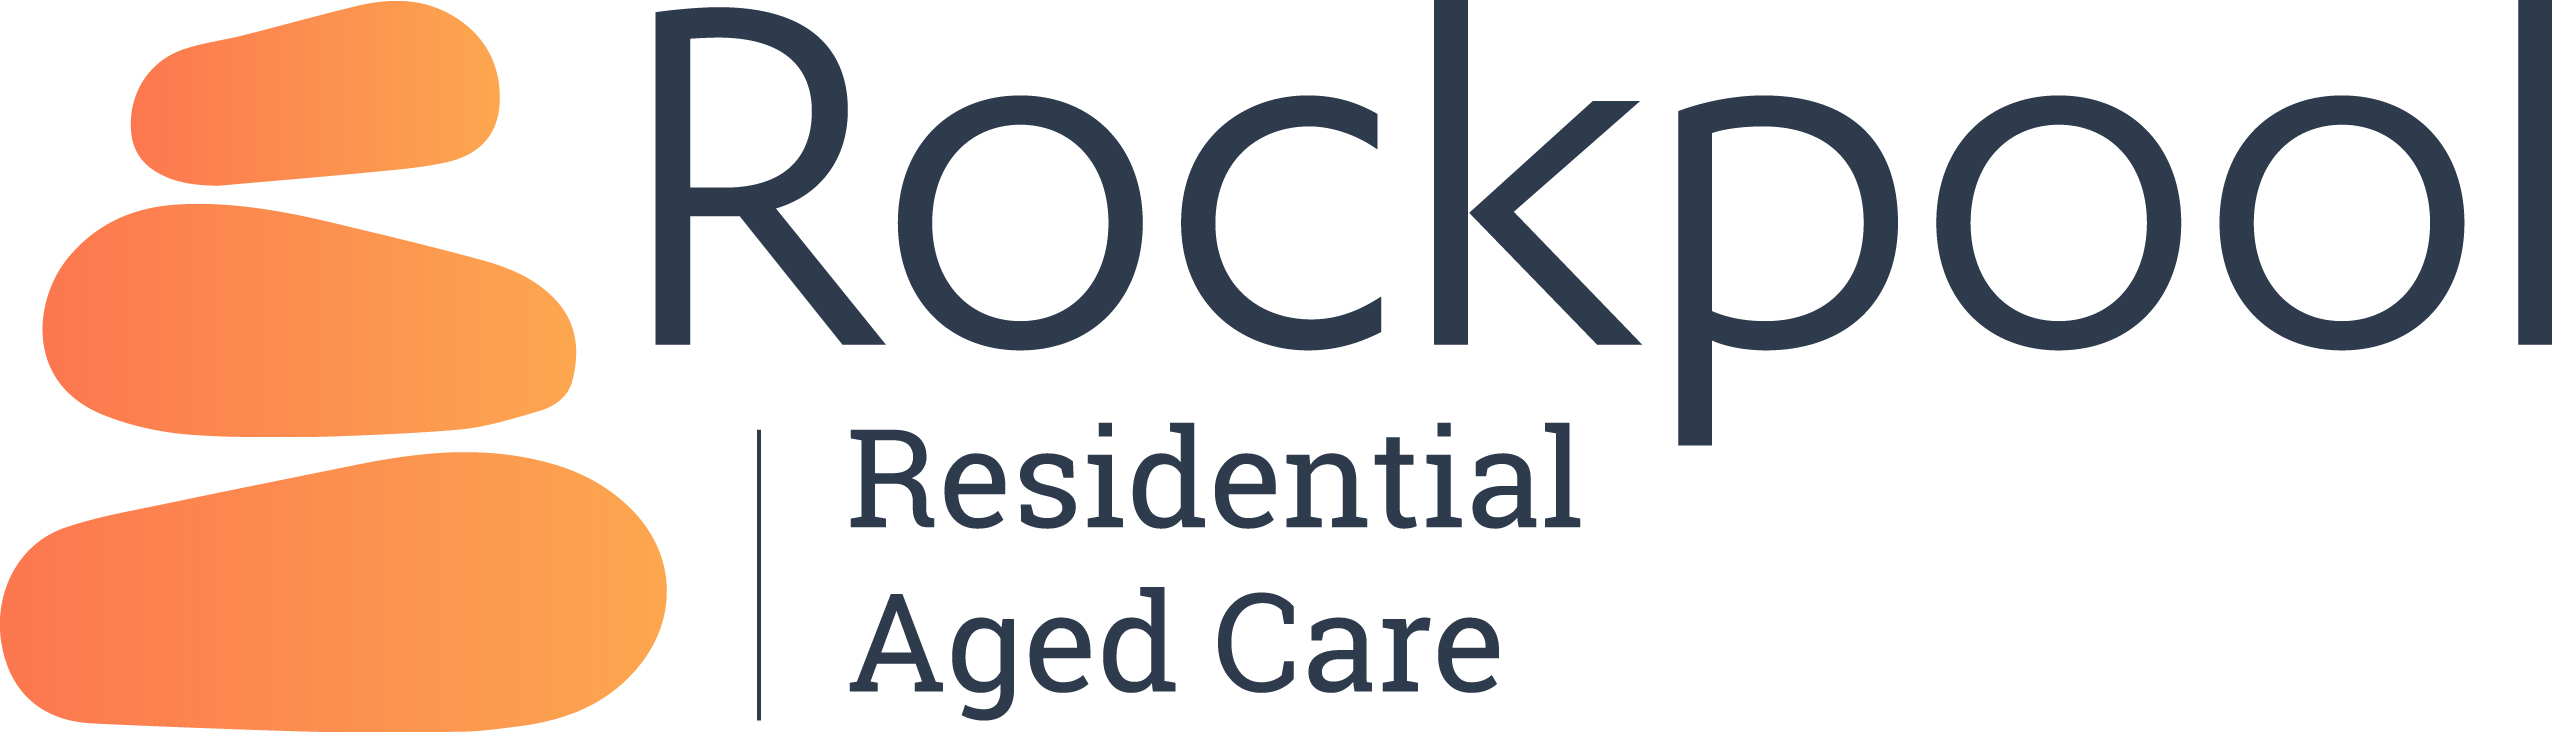 Rockpool Residential Aged Care